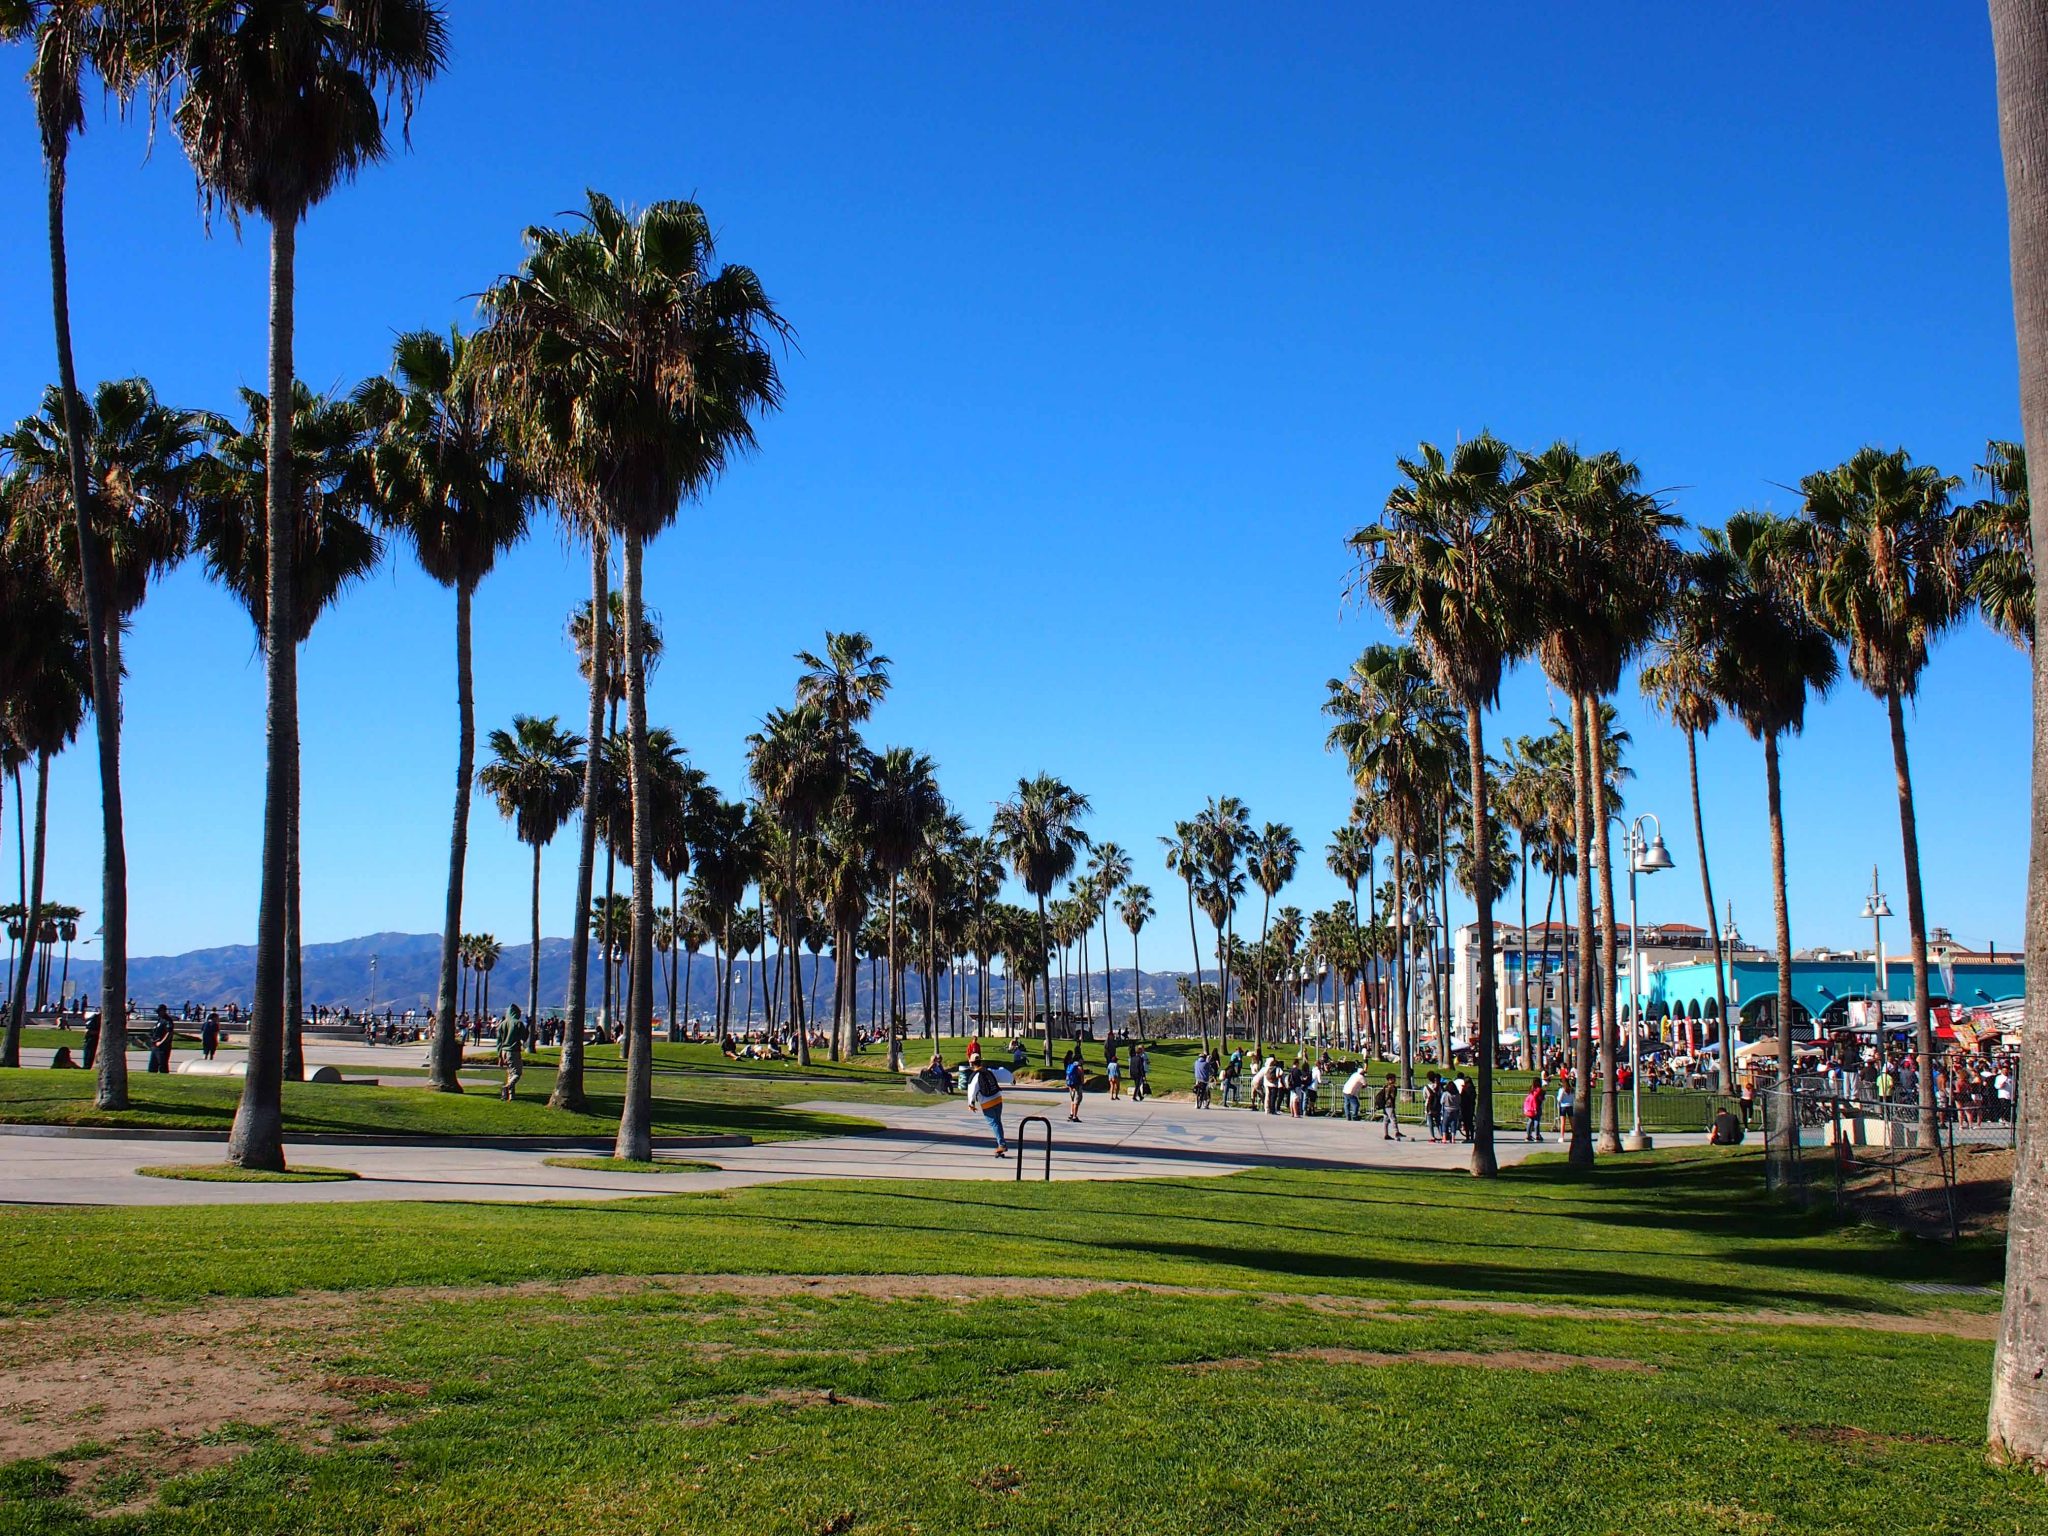 The skate parks and palm trees of Venice Beach.